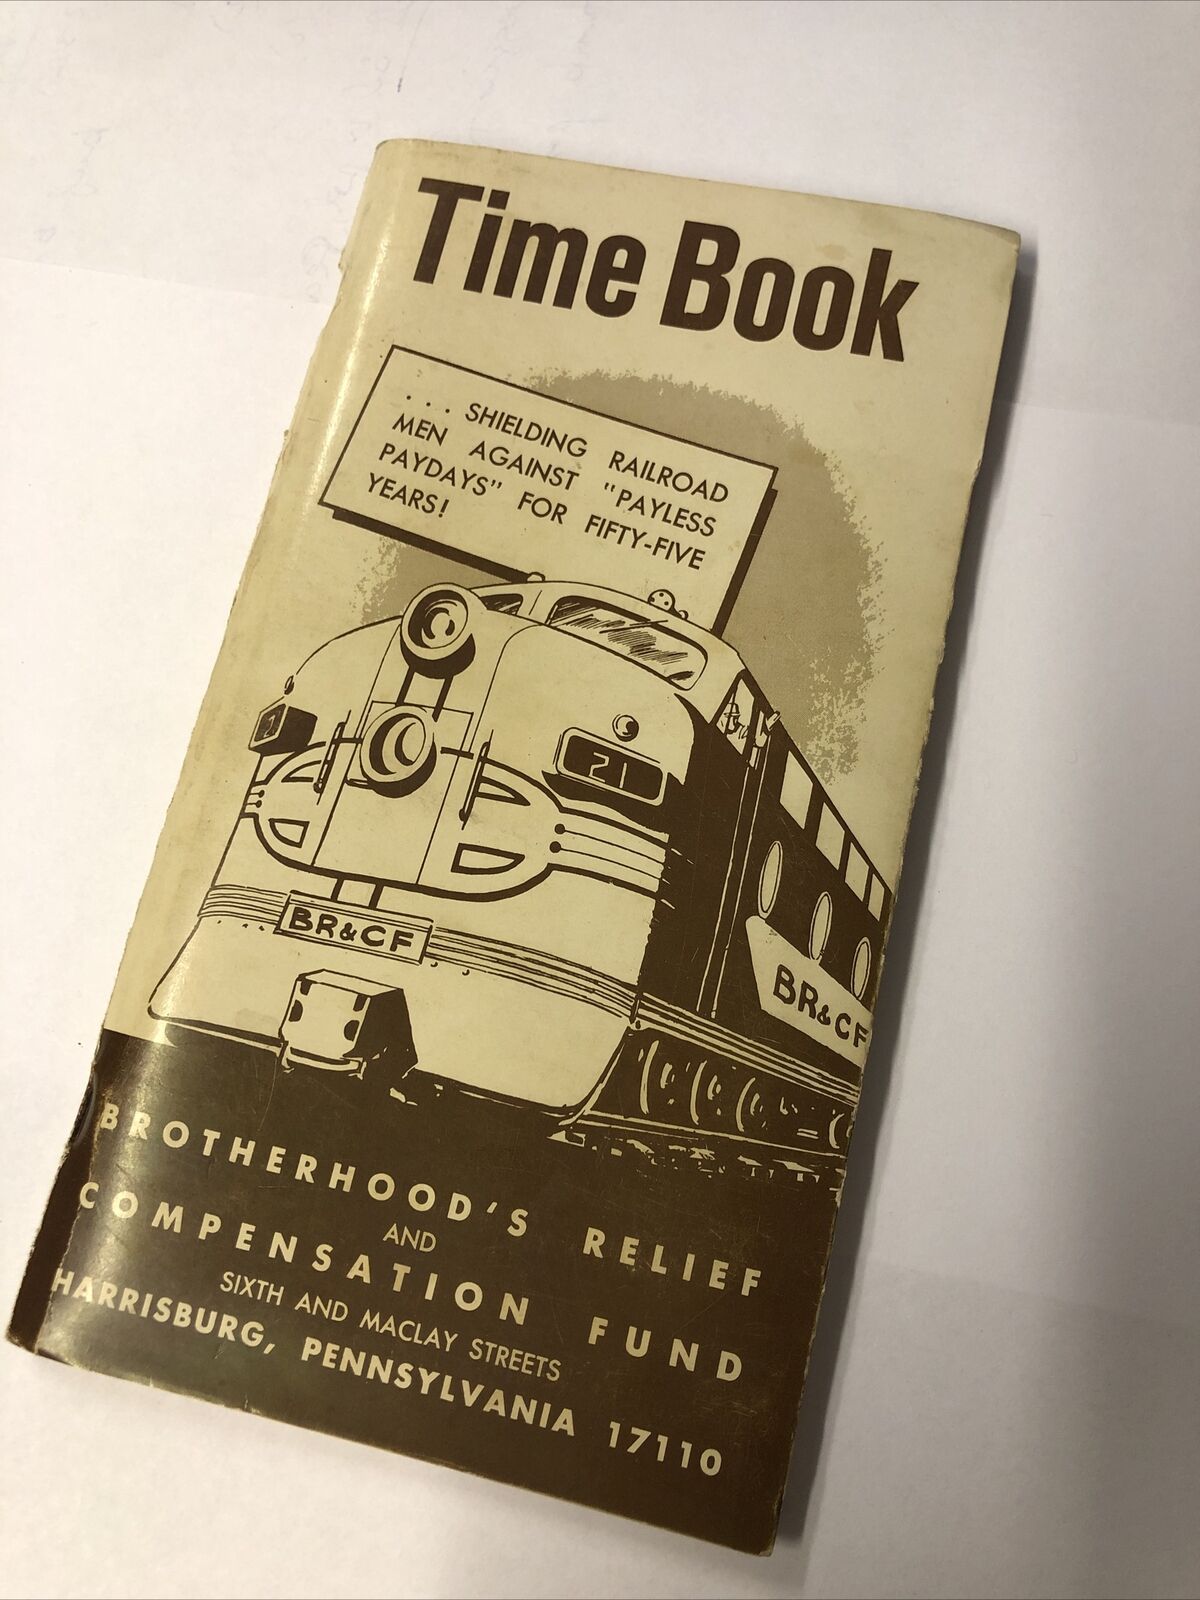 1969 Railroad Time Book Brotherhood\'s Relief & Compensation Fund Trains Railway